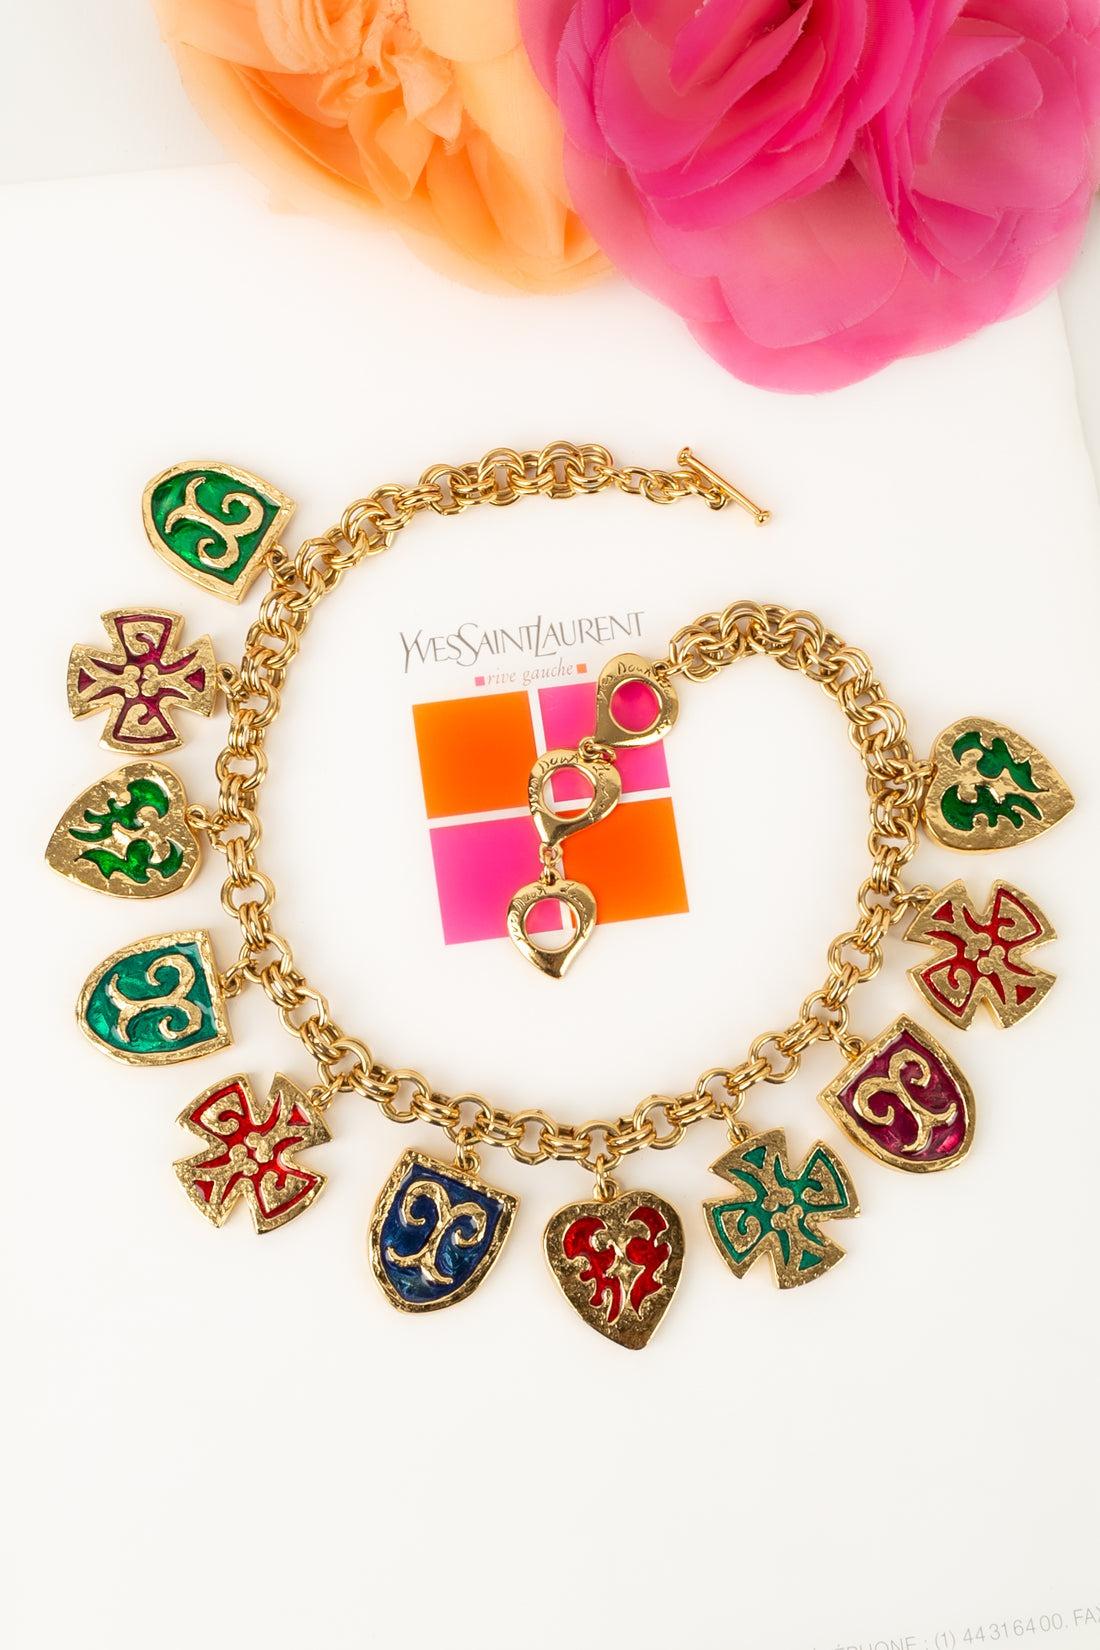 Yves Saint Laurent Short Necklace in Gold-Plated Metal and Enamel For Sale 5